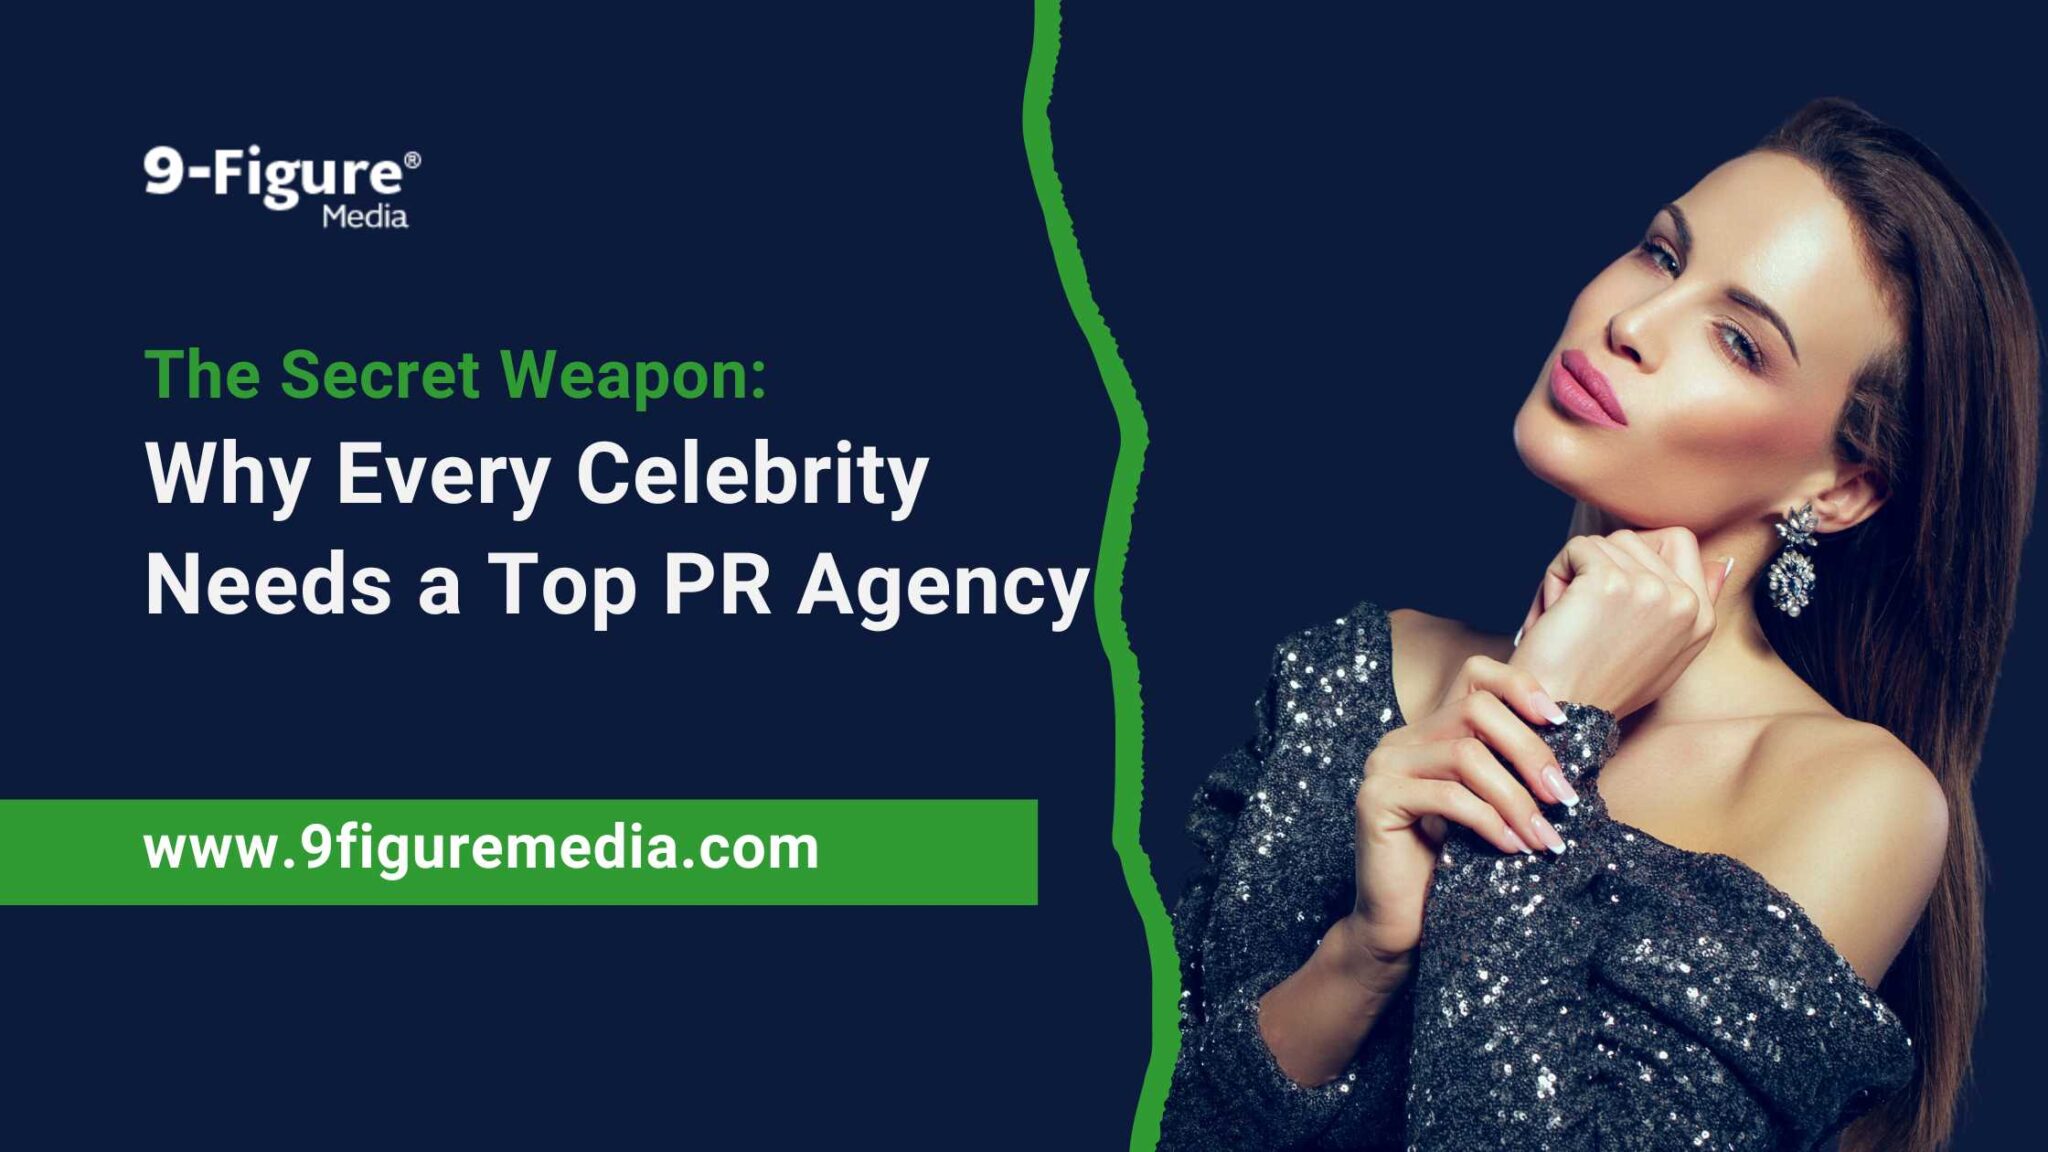 The Secret Weapon: Why Every Celebrity Needs a Top PR Agency